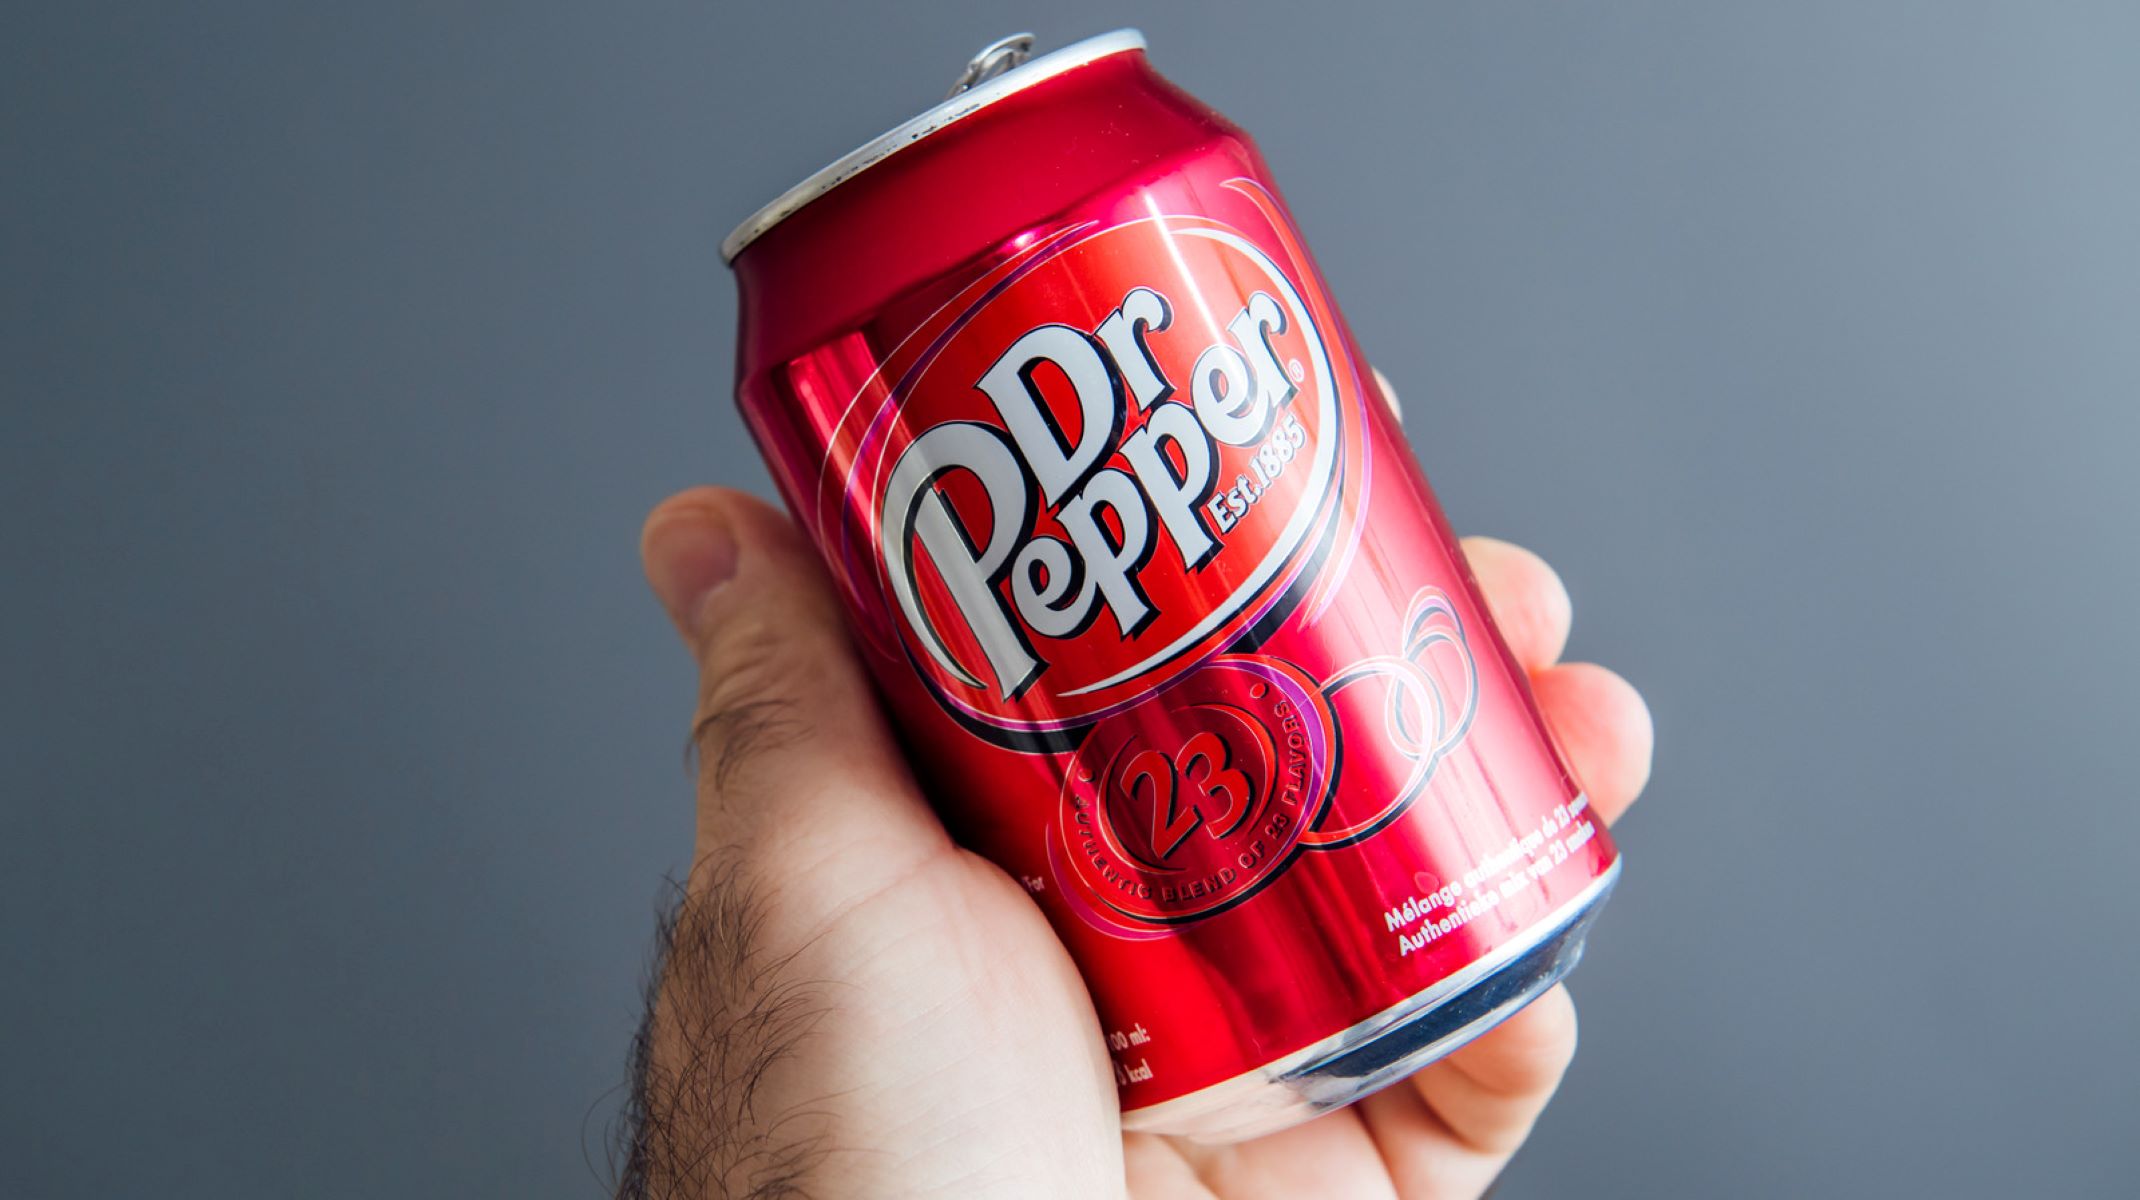 The Mind-Blowing Flavor Explosion Of Dr. Pepper - A Symphony Of Sweet, Spicy, And Mysterious Tastes!